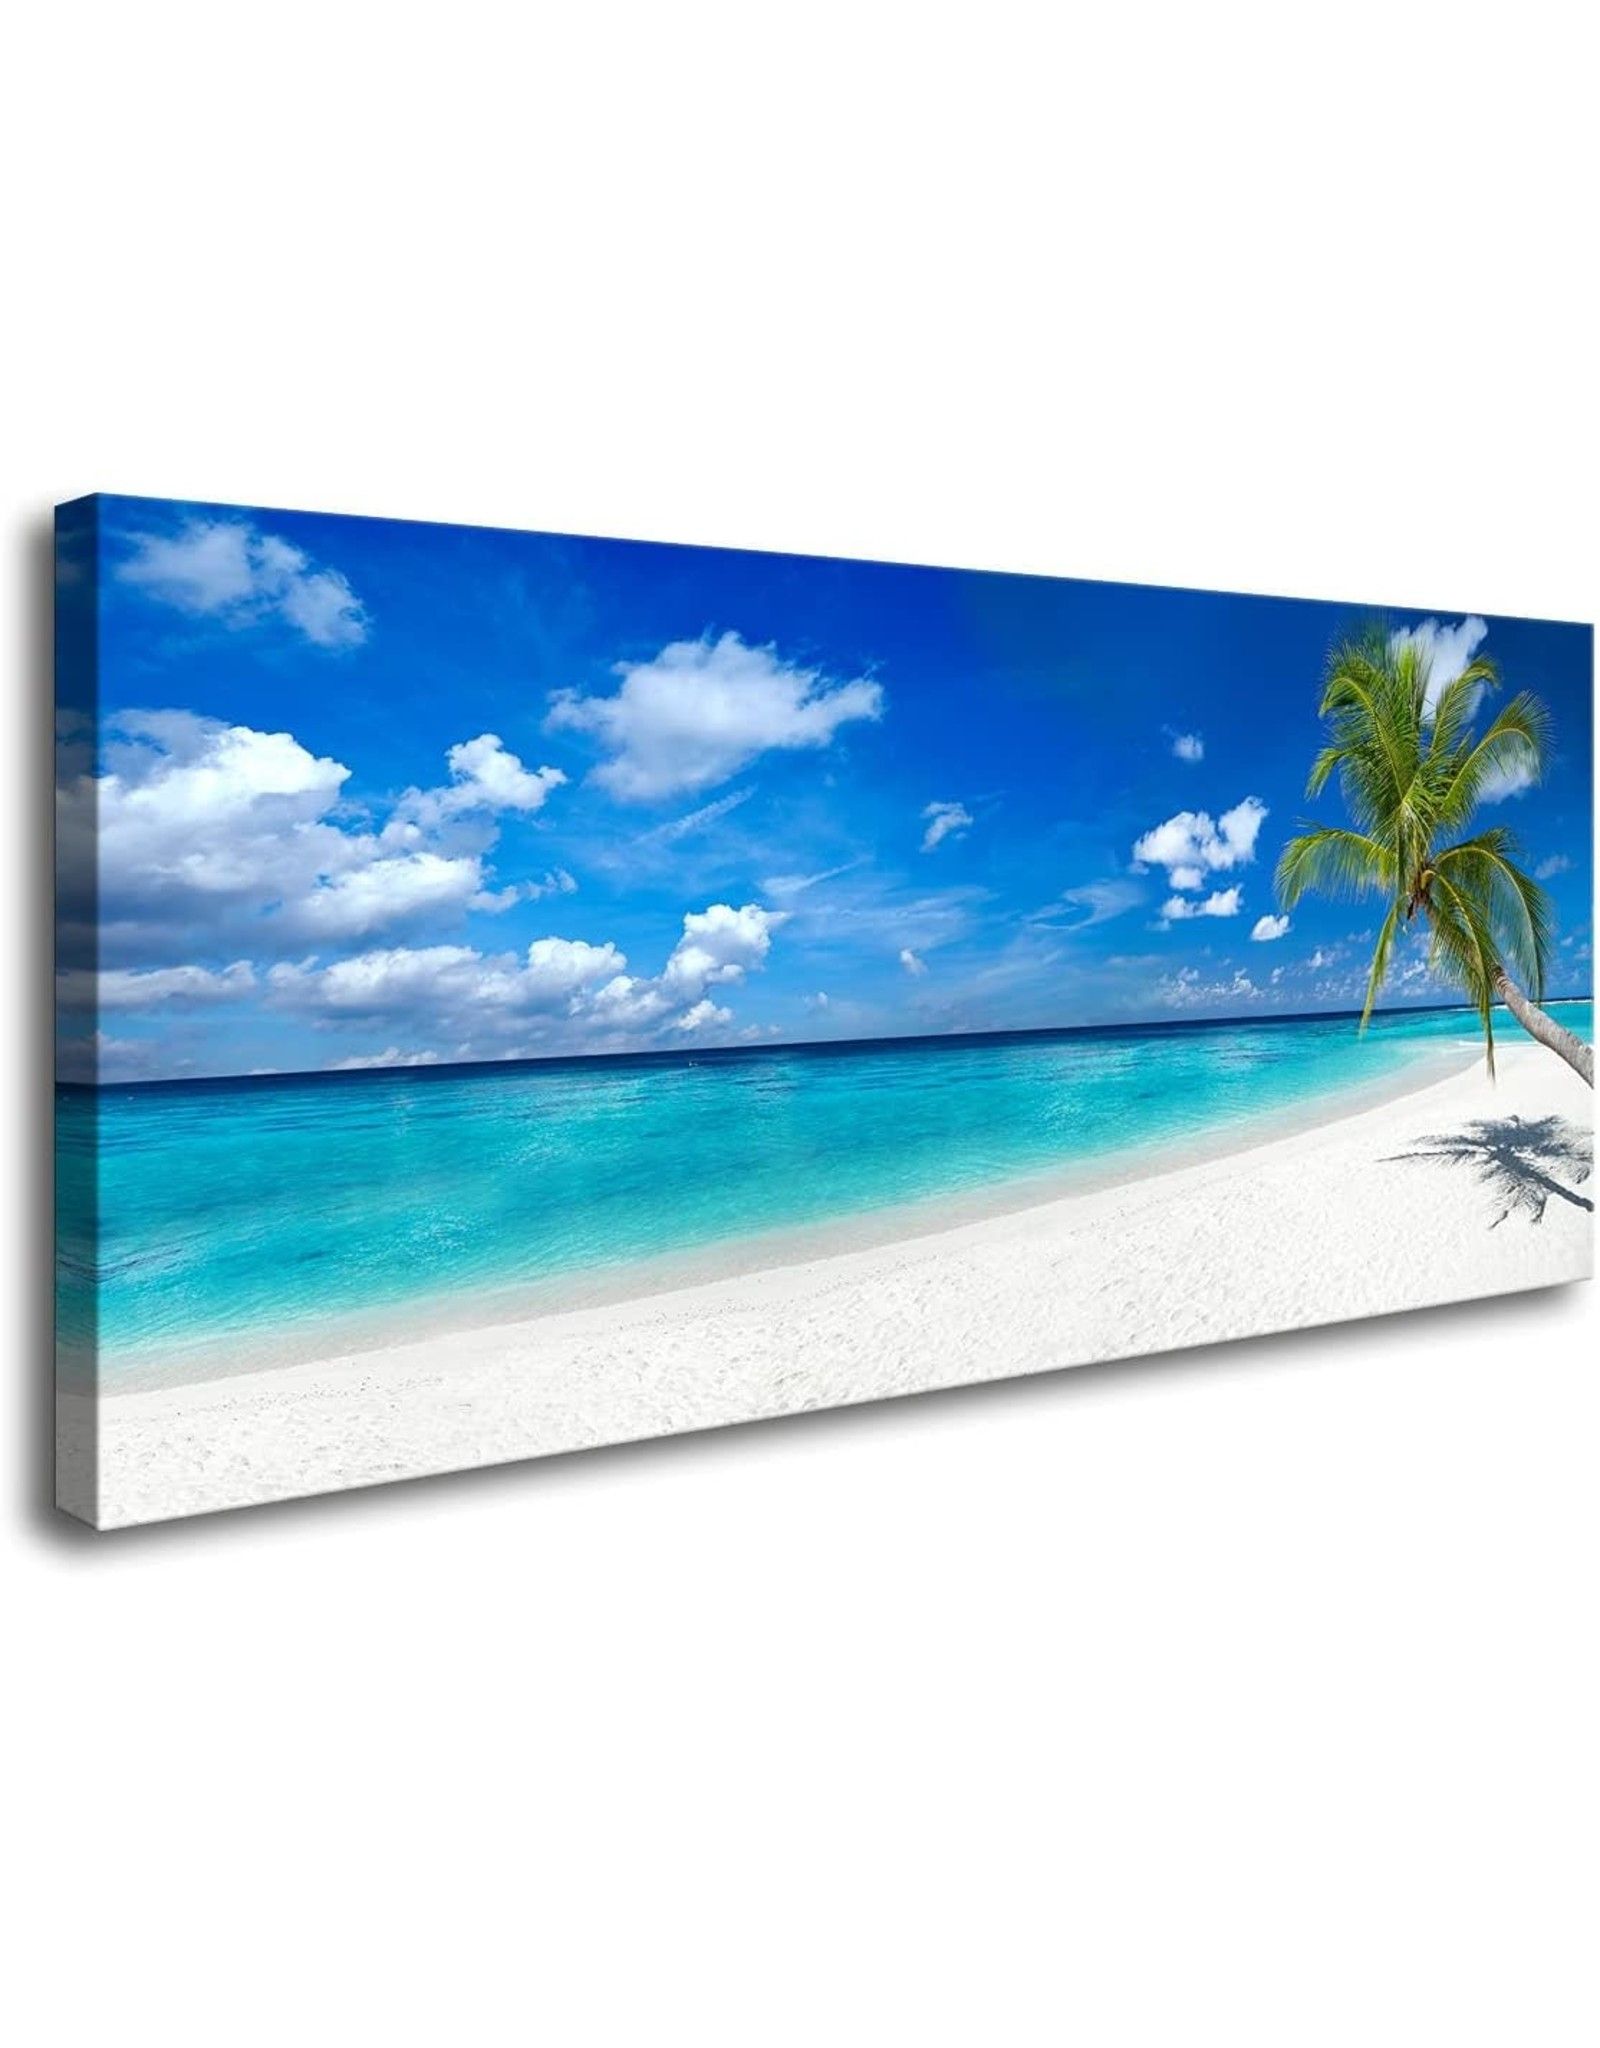 Xxmwallart Fc2475 Seascape Wall Art Tropical Paradise Beach With White Sand  And Coco Palms Canvas Wall Art Summer Beach Painting Sea Nature Pictures  For Living Room Bedroom Home And Office Wall Decor – Inside Newest Tropical Paradise Wall Art (View 12 of 20)